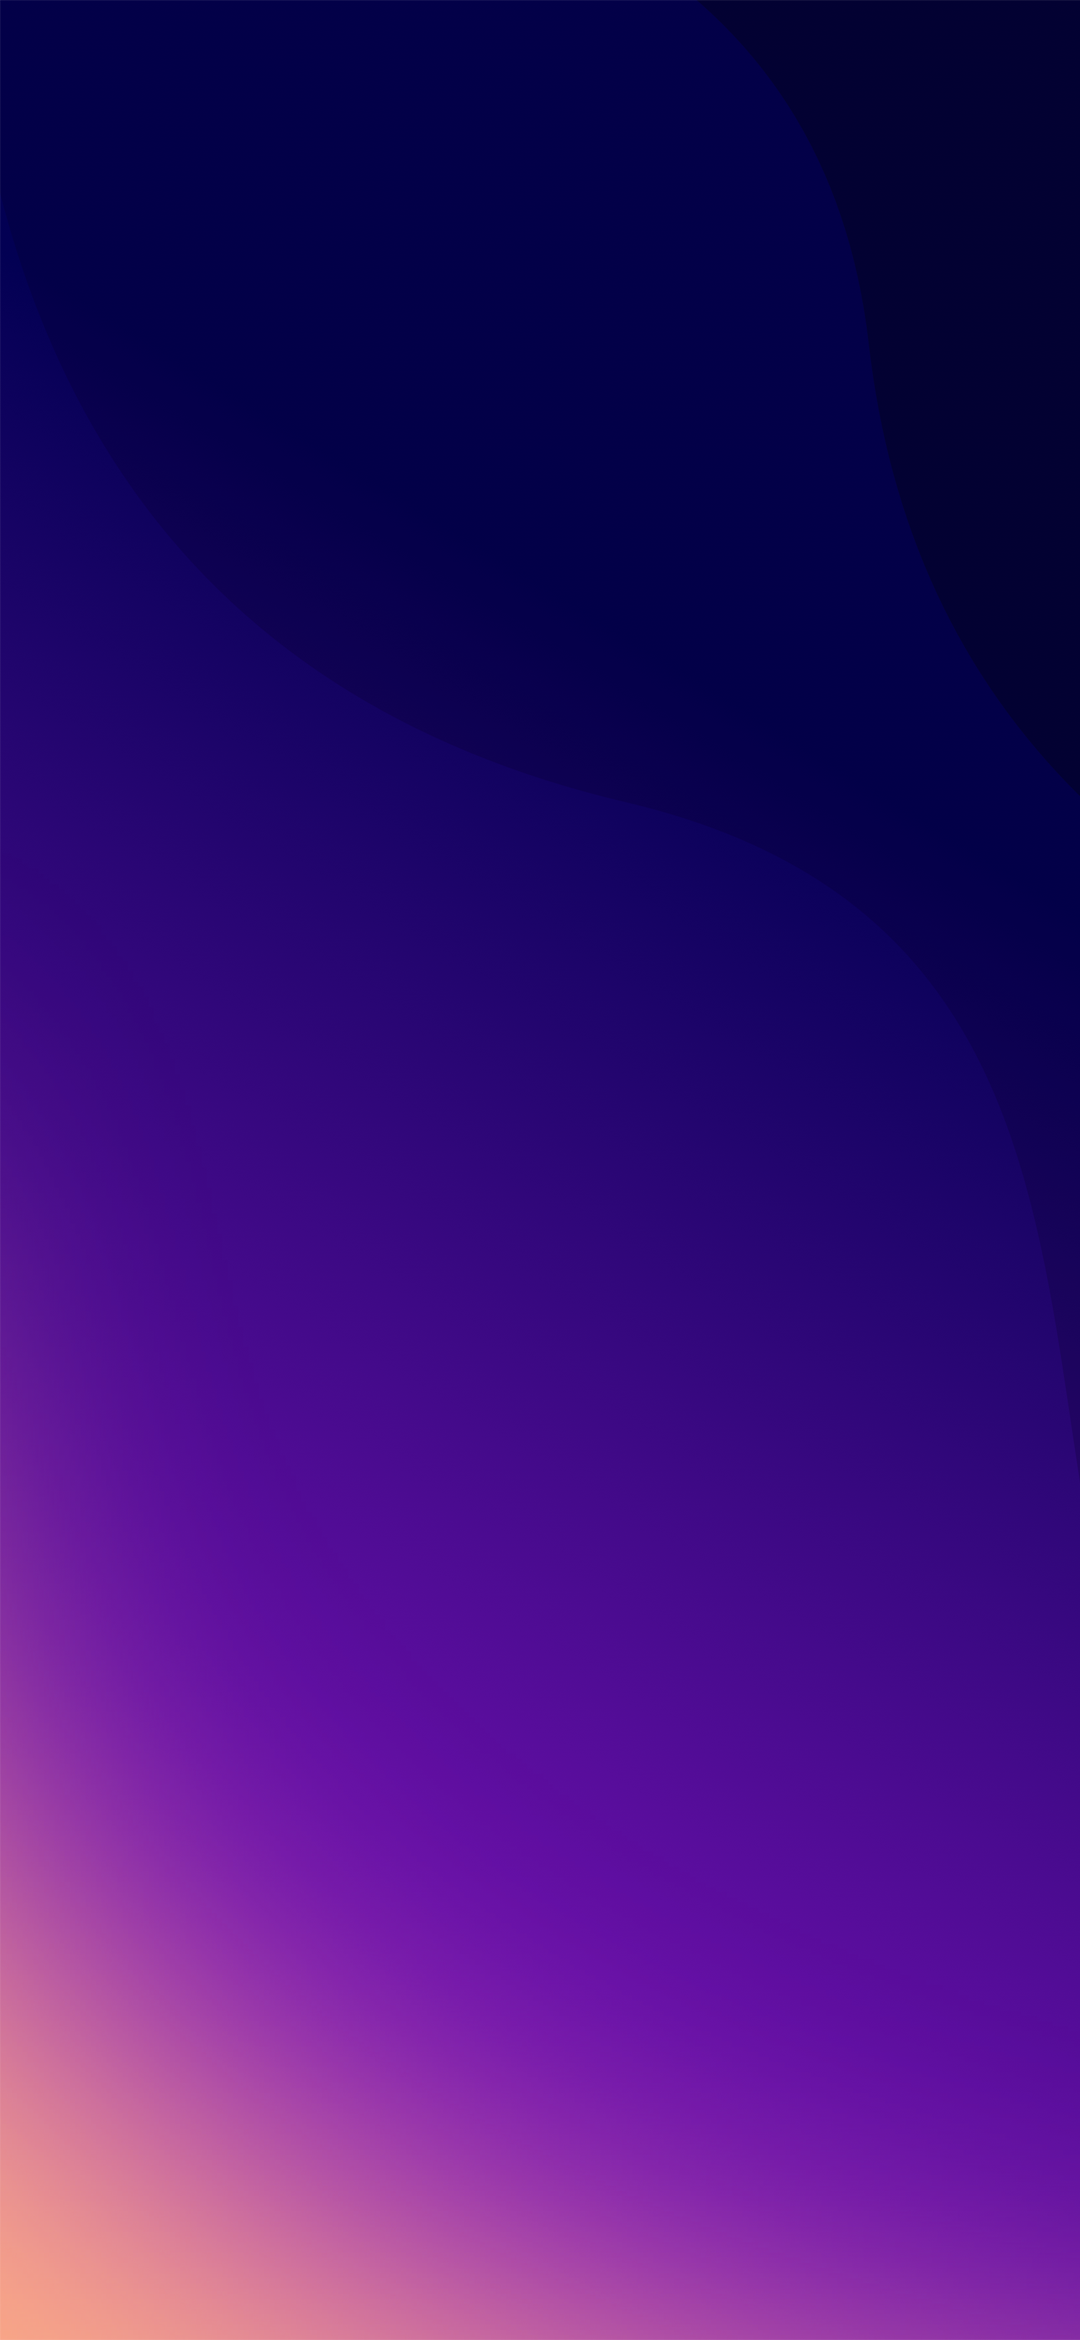 Android Gradient Wallpaper Free Android Gradient Background